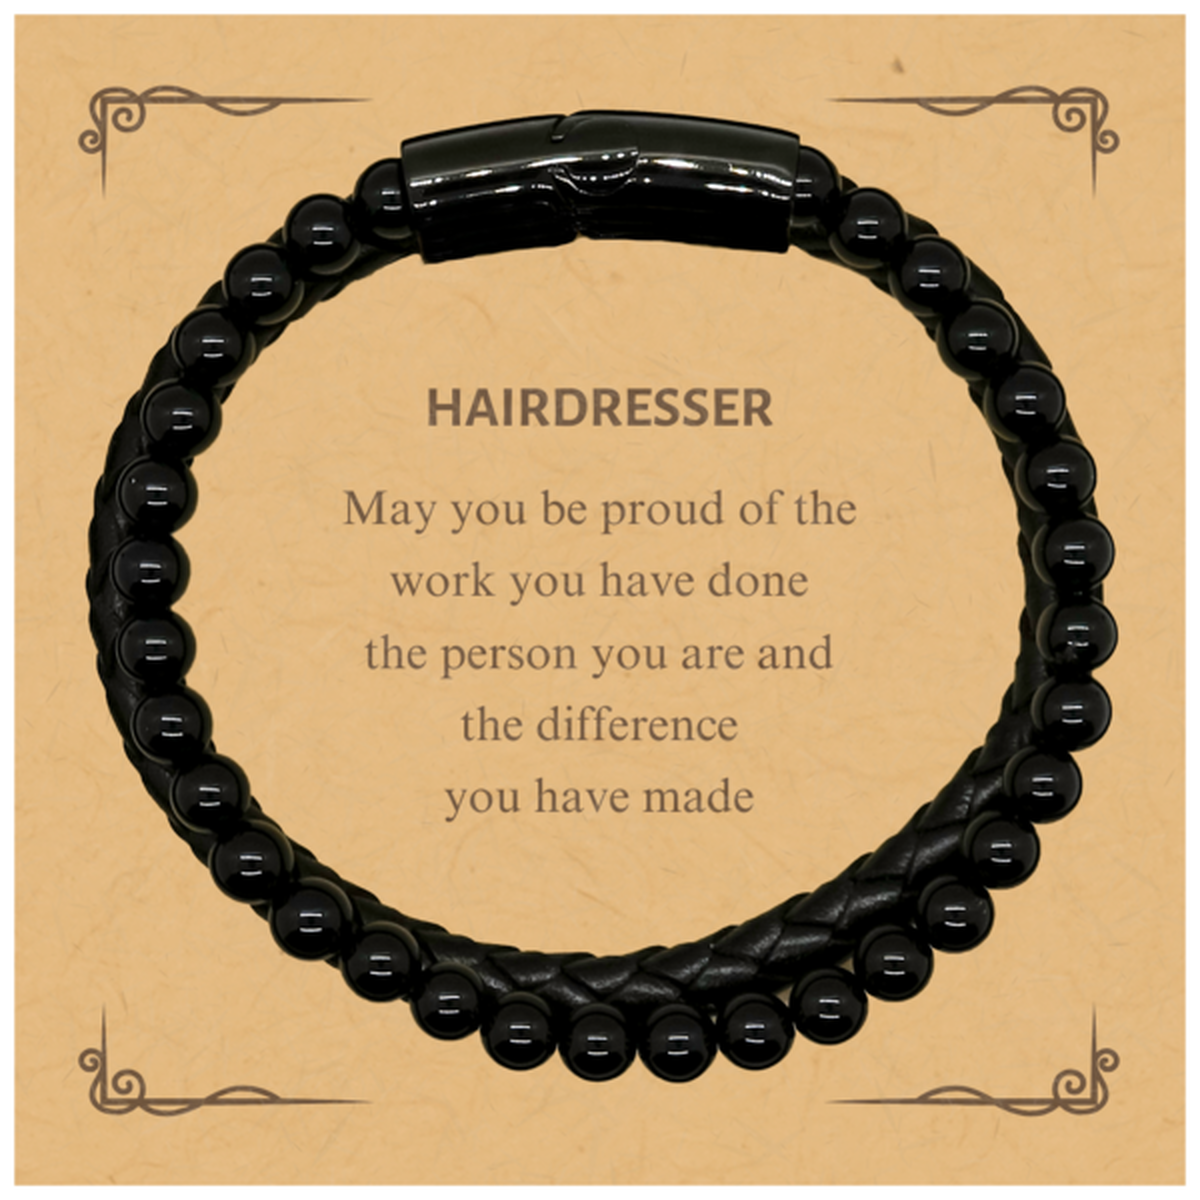 Hairdresser May you be proud of the work you have done, Retirement Hairdresser Stone Leather Bracelets for Colleague Appreciation Gifts Amazing for Hairdresser